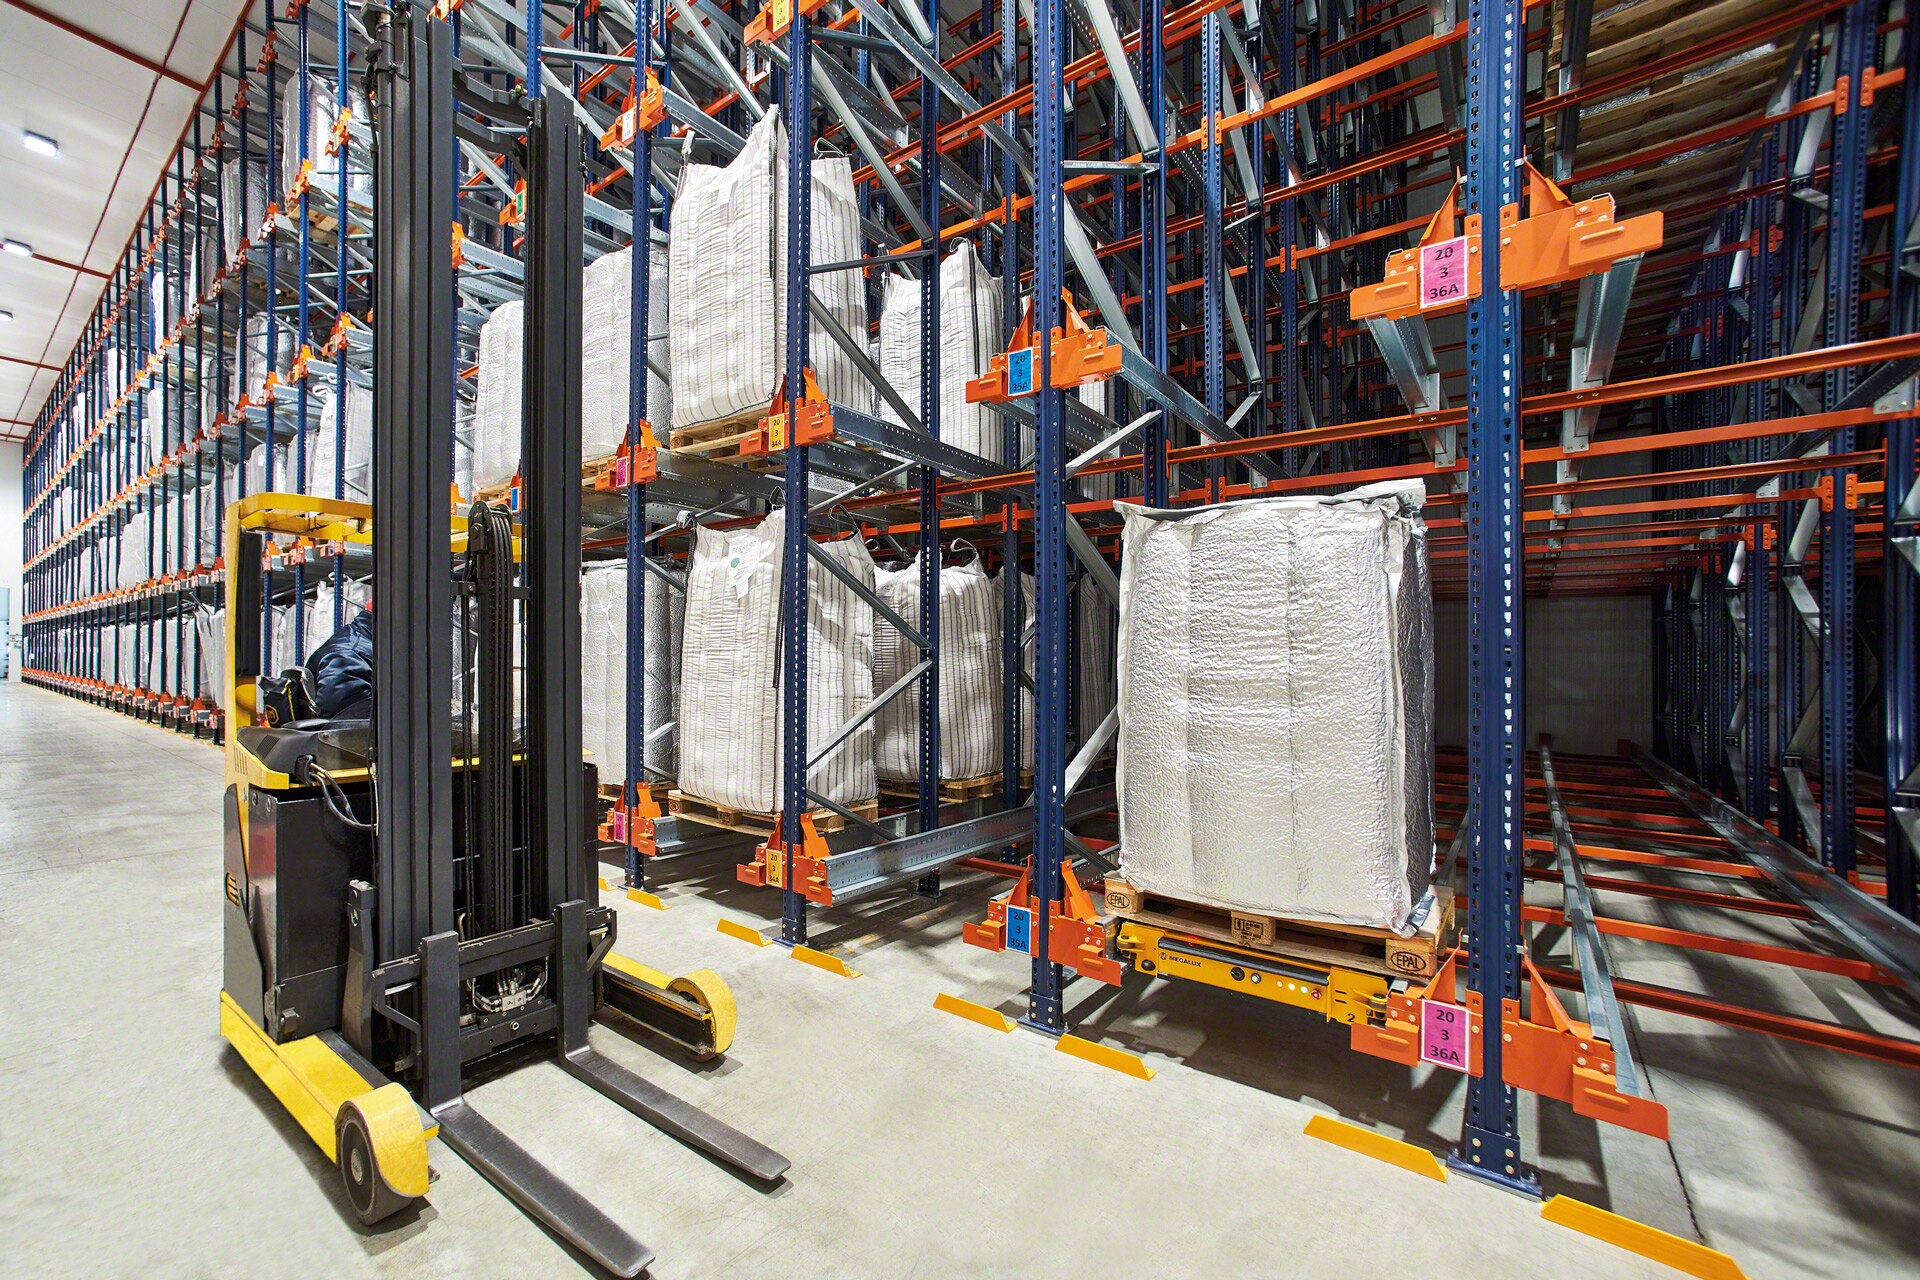 Forklift trucks can insert the electric shuttle into up to 40 meters deep racks